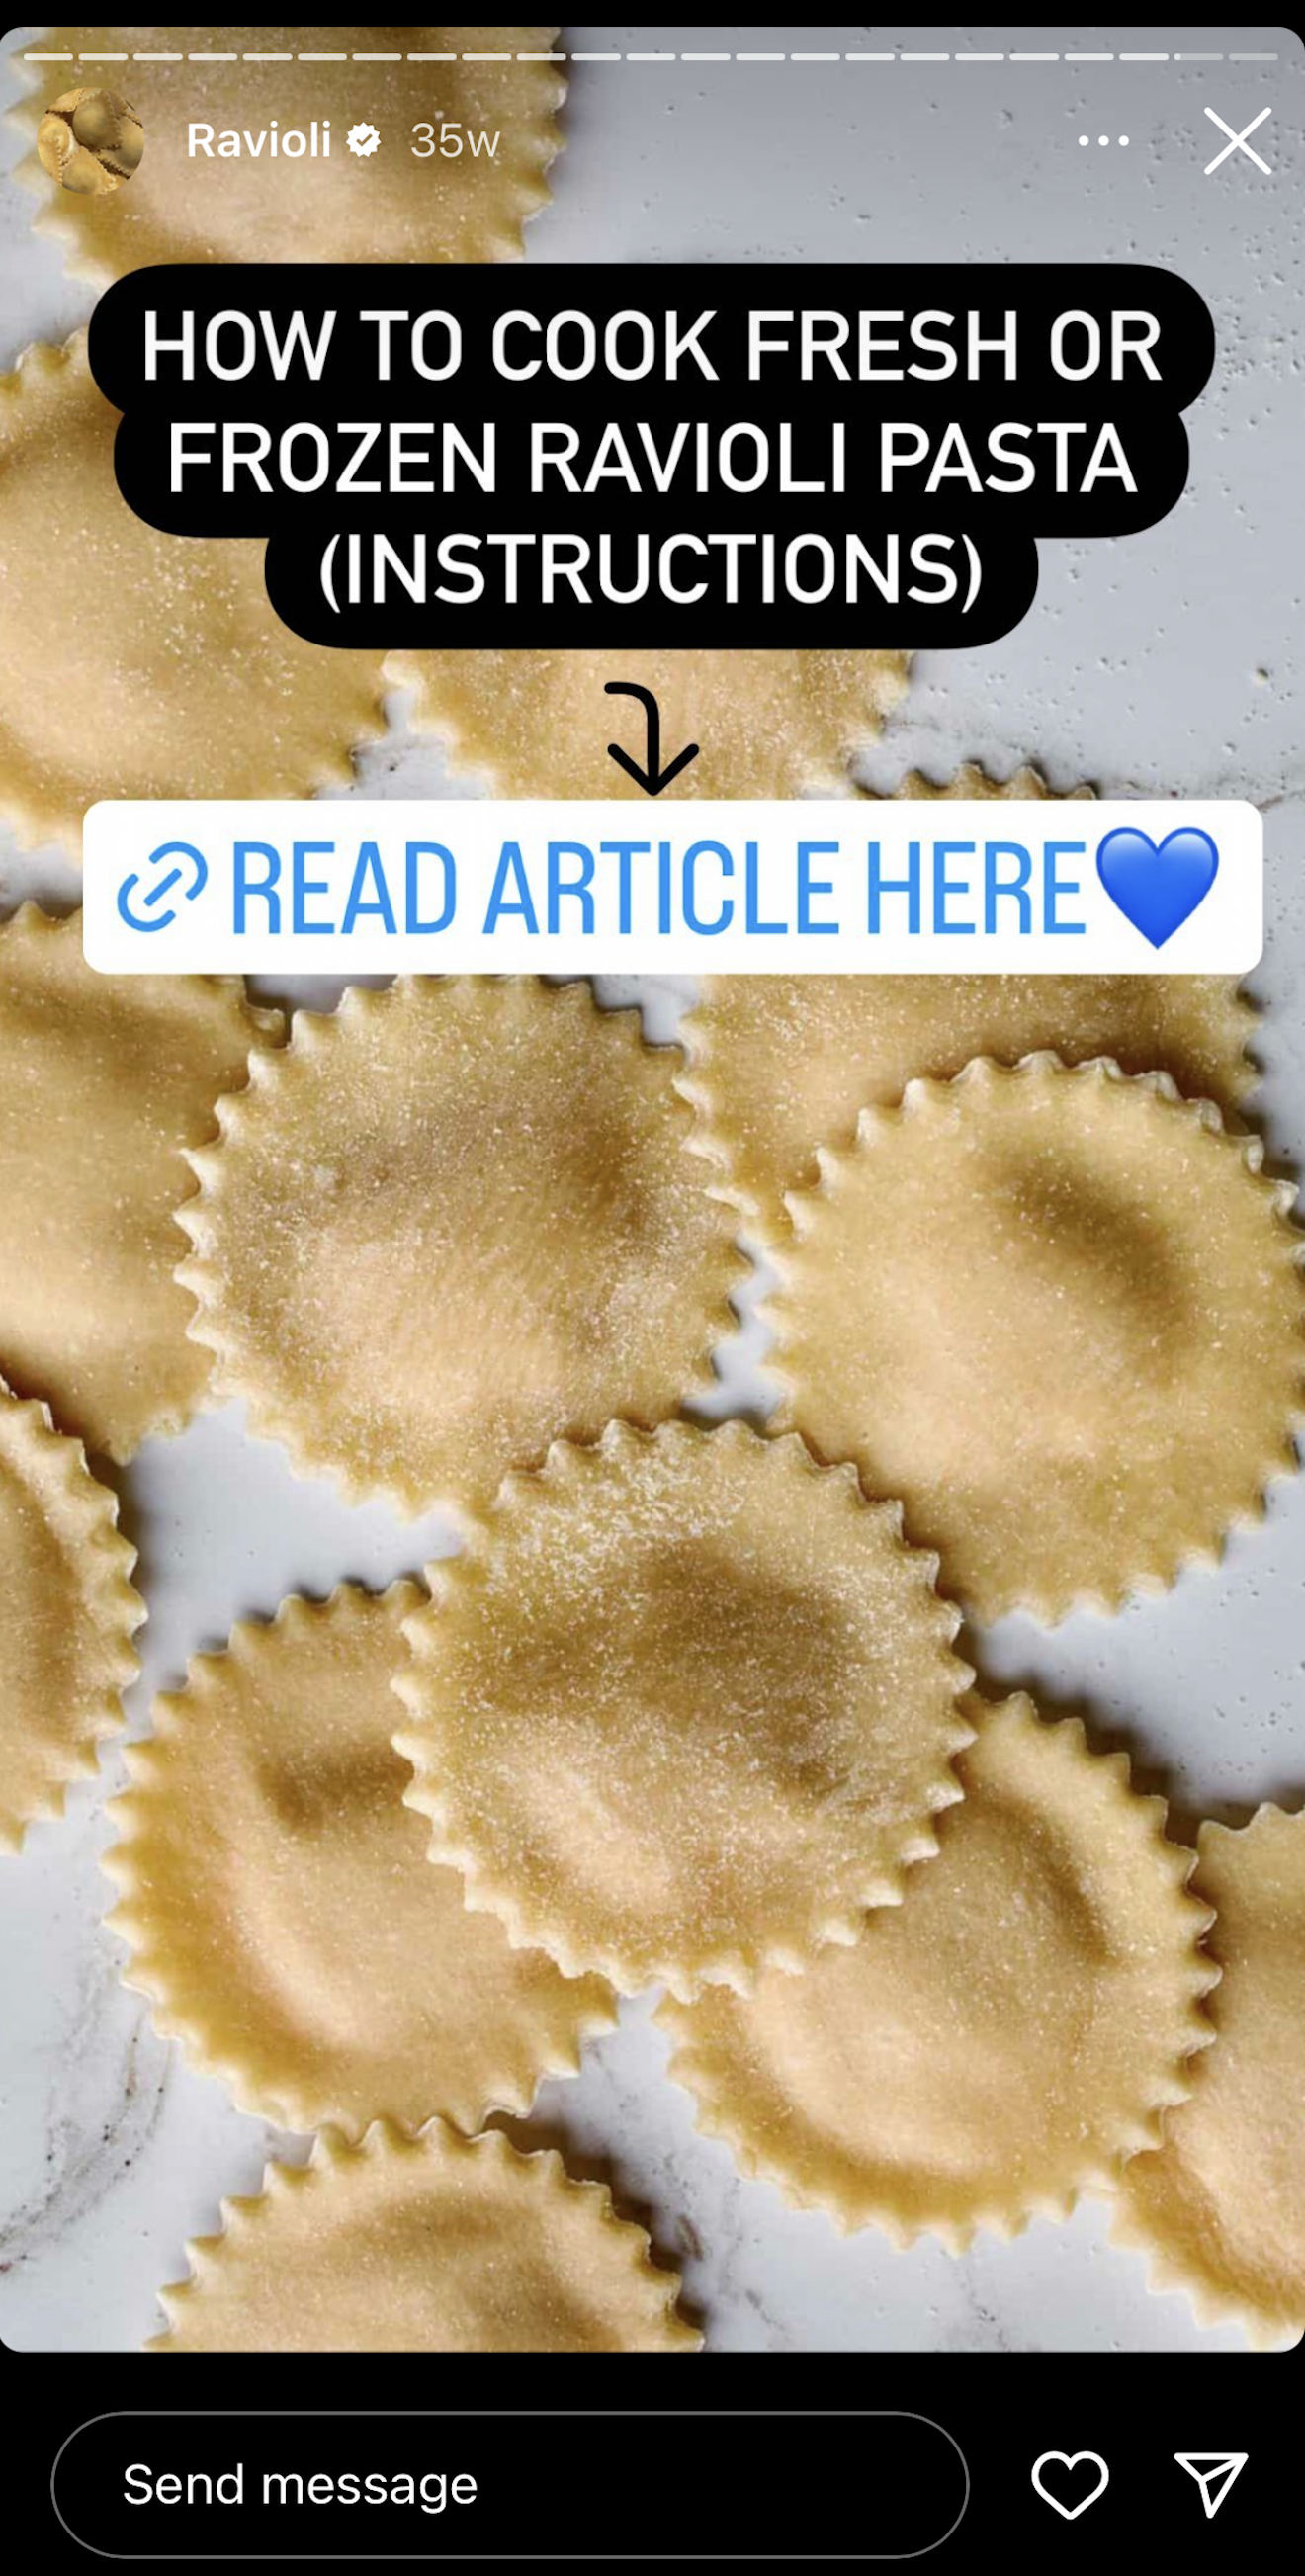 An Instagram Story with a link titled "Read article here" with an arrow pointing to the link.